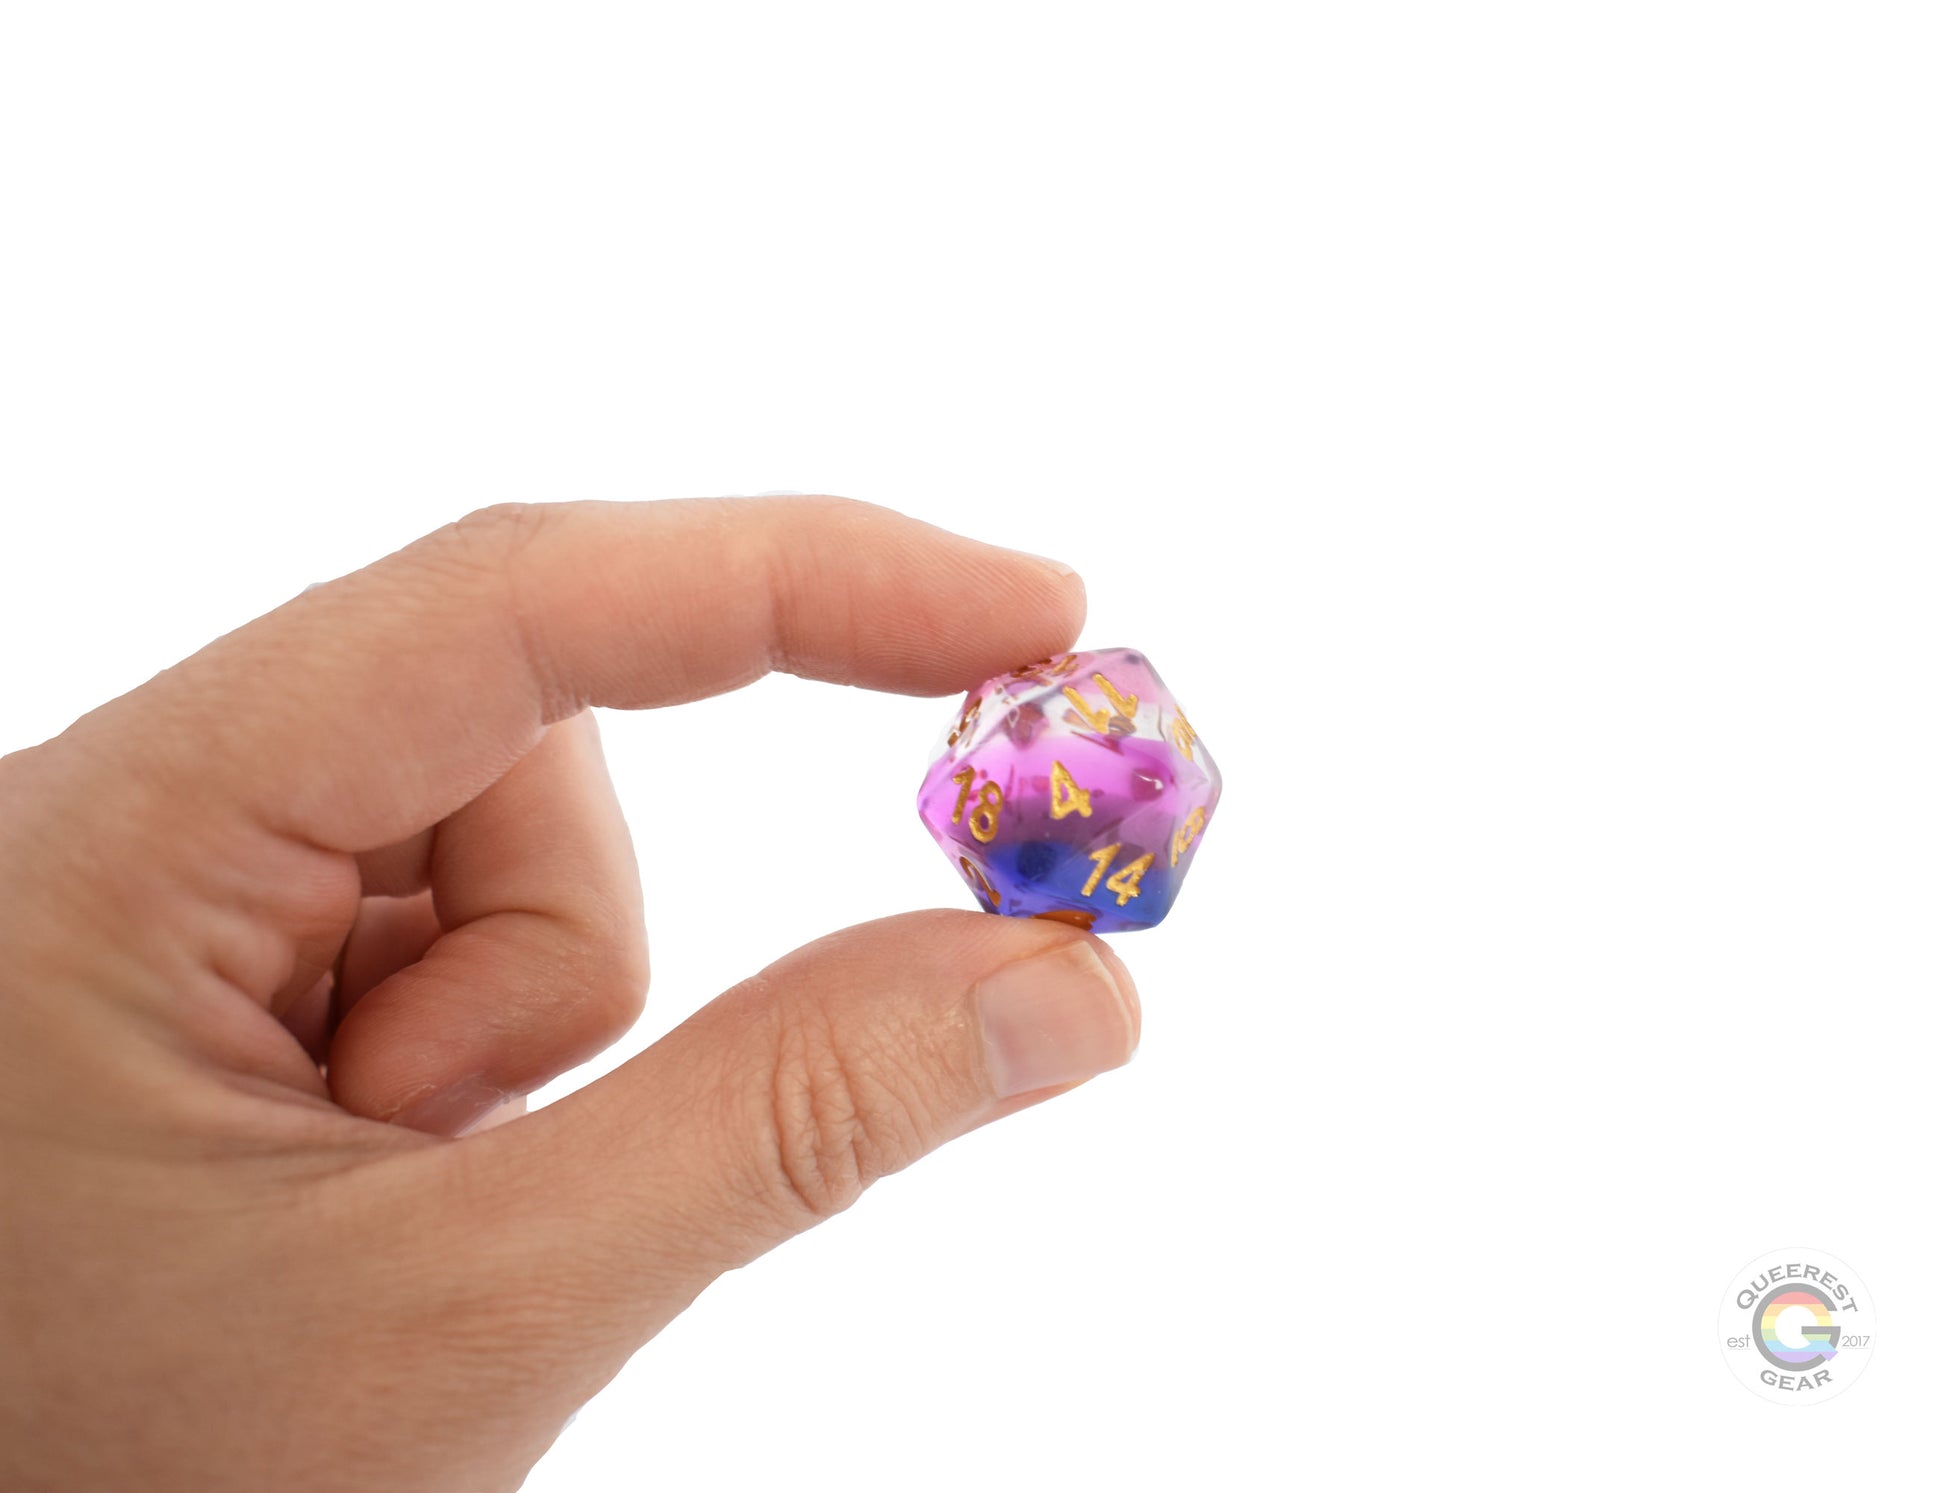 A hand holding up the genderfluid d20 to show off the color and transparency